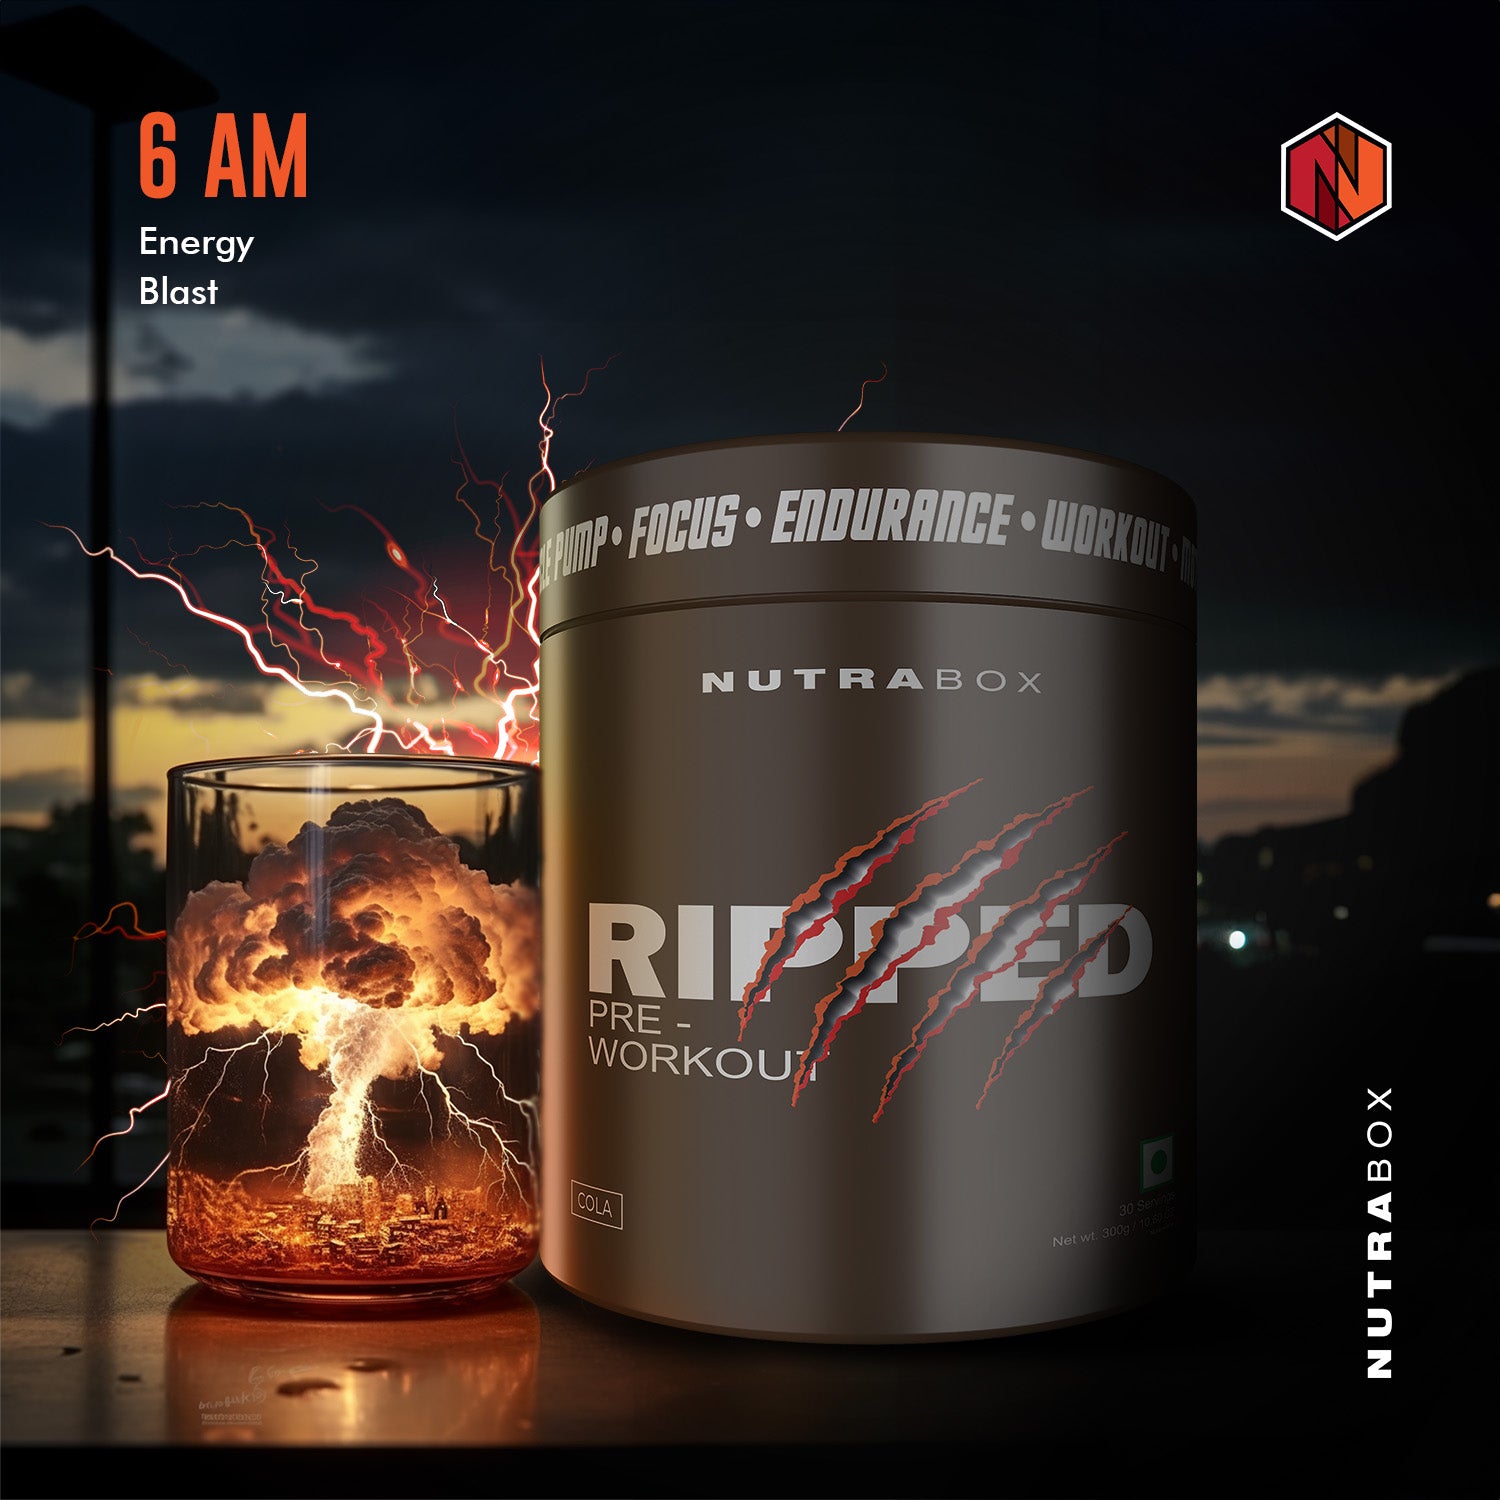 6AM Energy blast of Ripped Preworkout